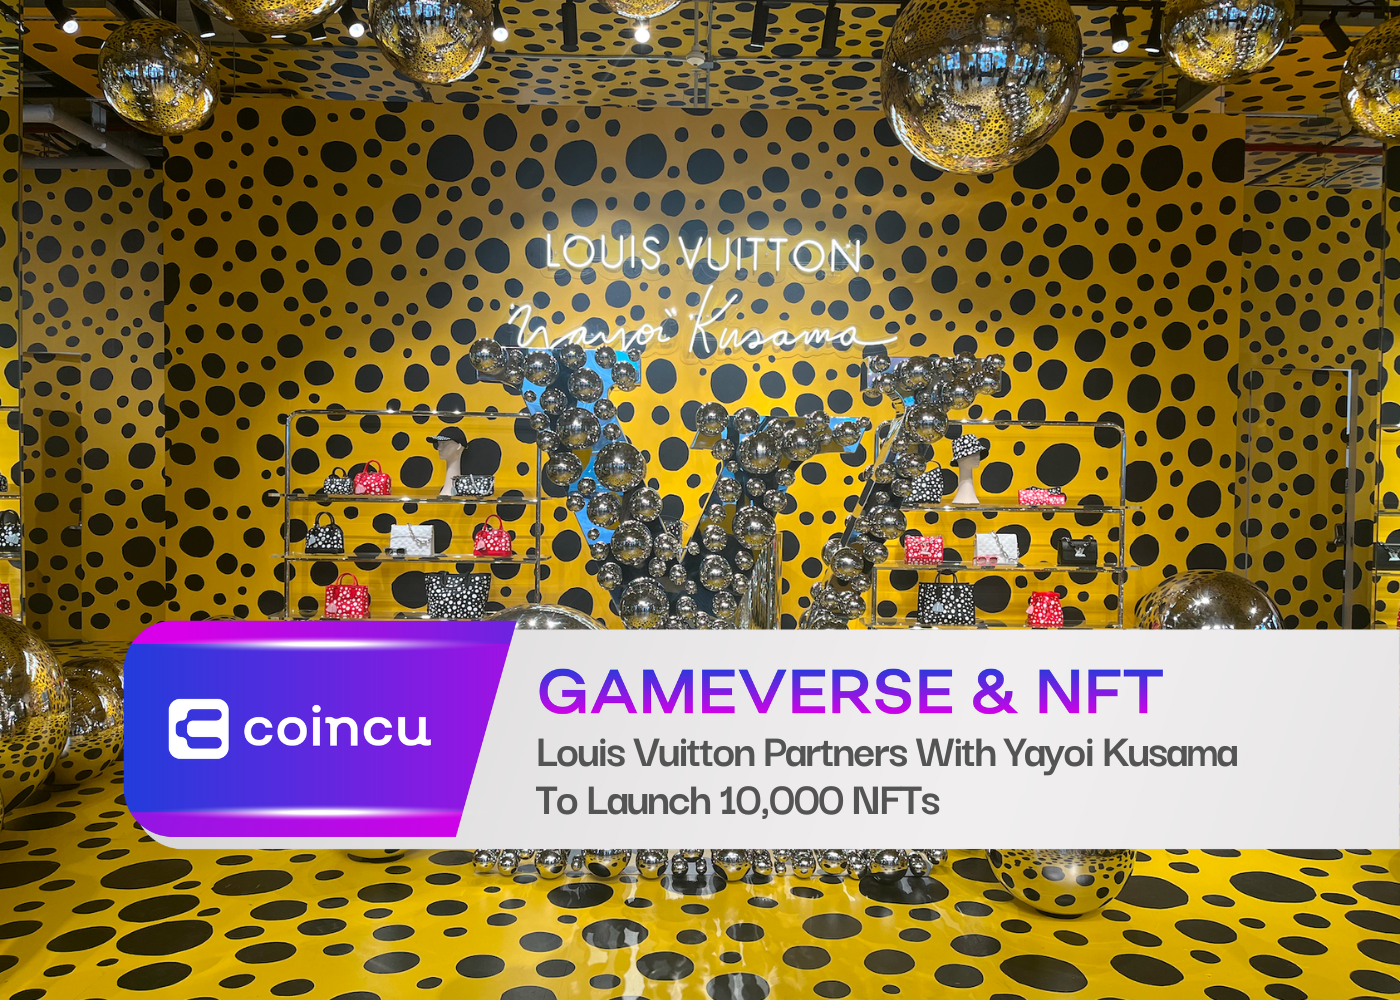 Louis Vuitton Partners With Yayoi Kusama To Launch 10,000 NFTs - CoinCu News